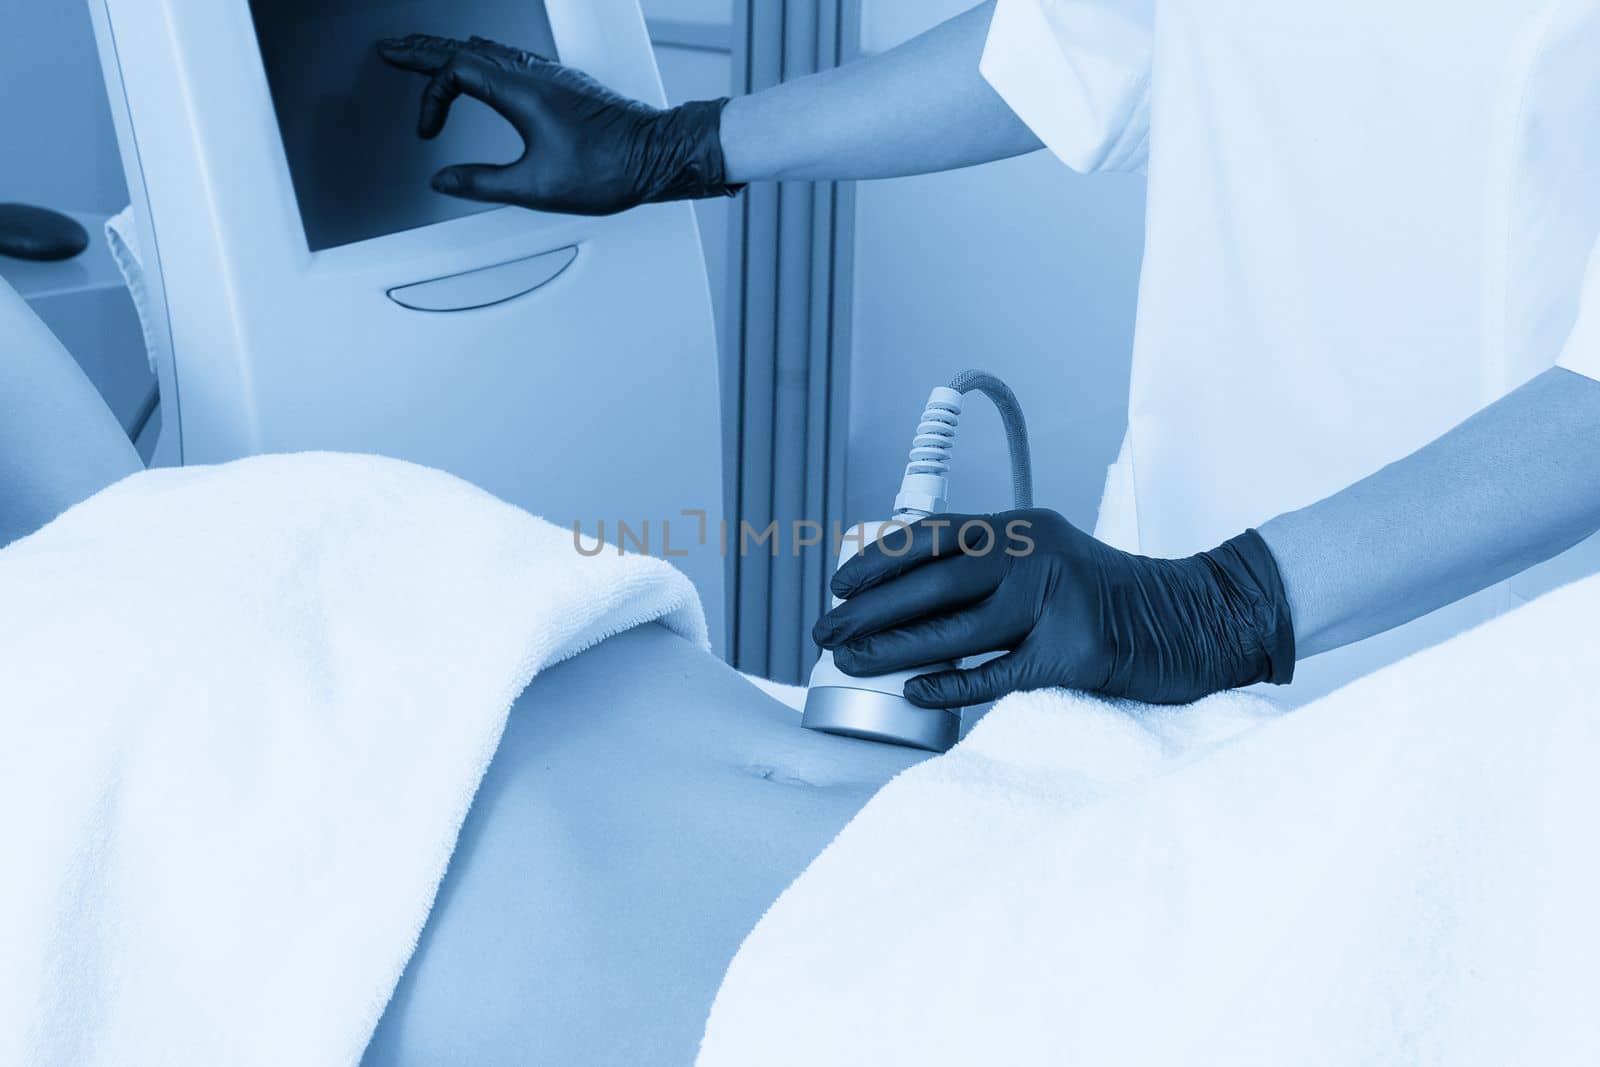 Ultrasound cavitation body contouring treatment. Woman getting anti-cellulite and anti-fat therapy on her leg in beauty salon by Mariakray